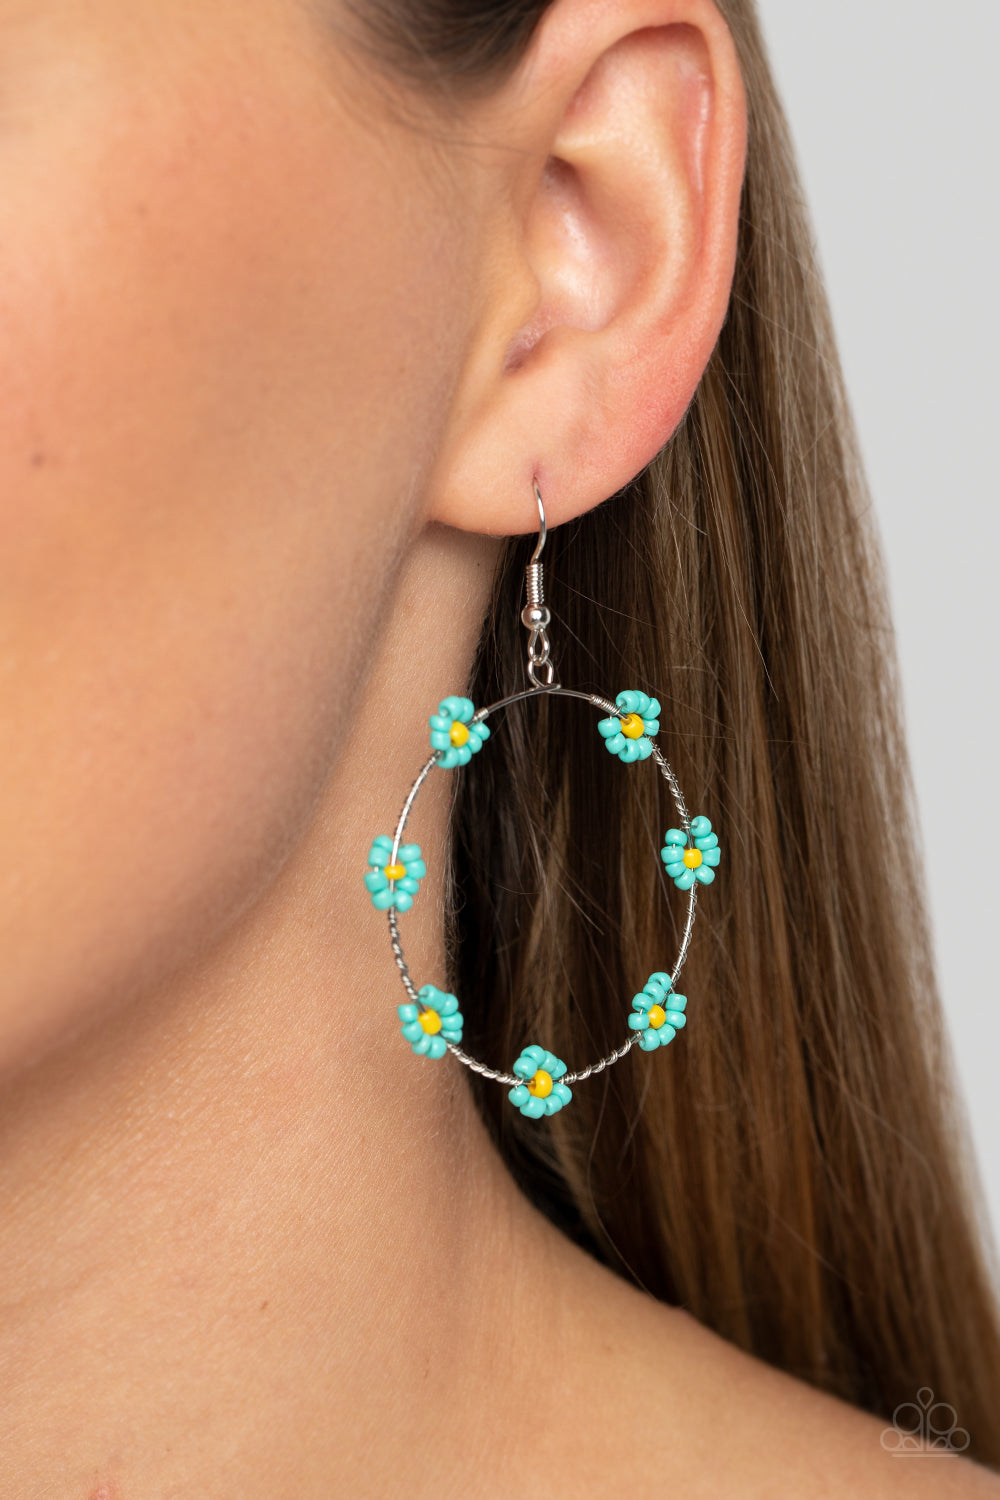 Paparazzi Accessories: Dainty Daisies - Blue Seed Bead Earrings